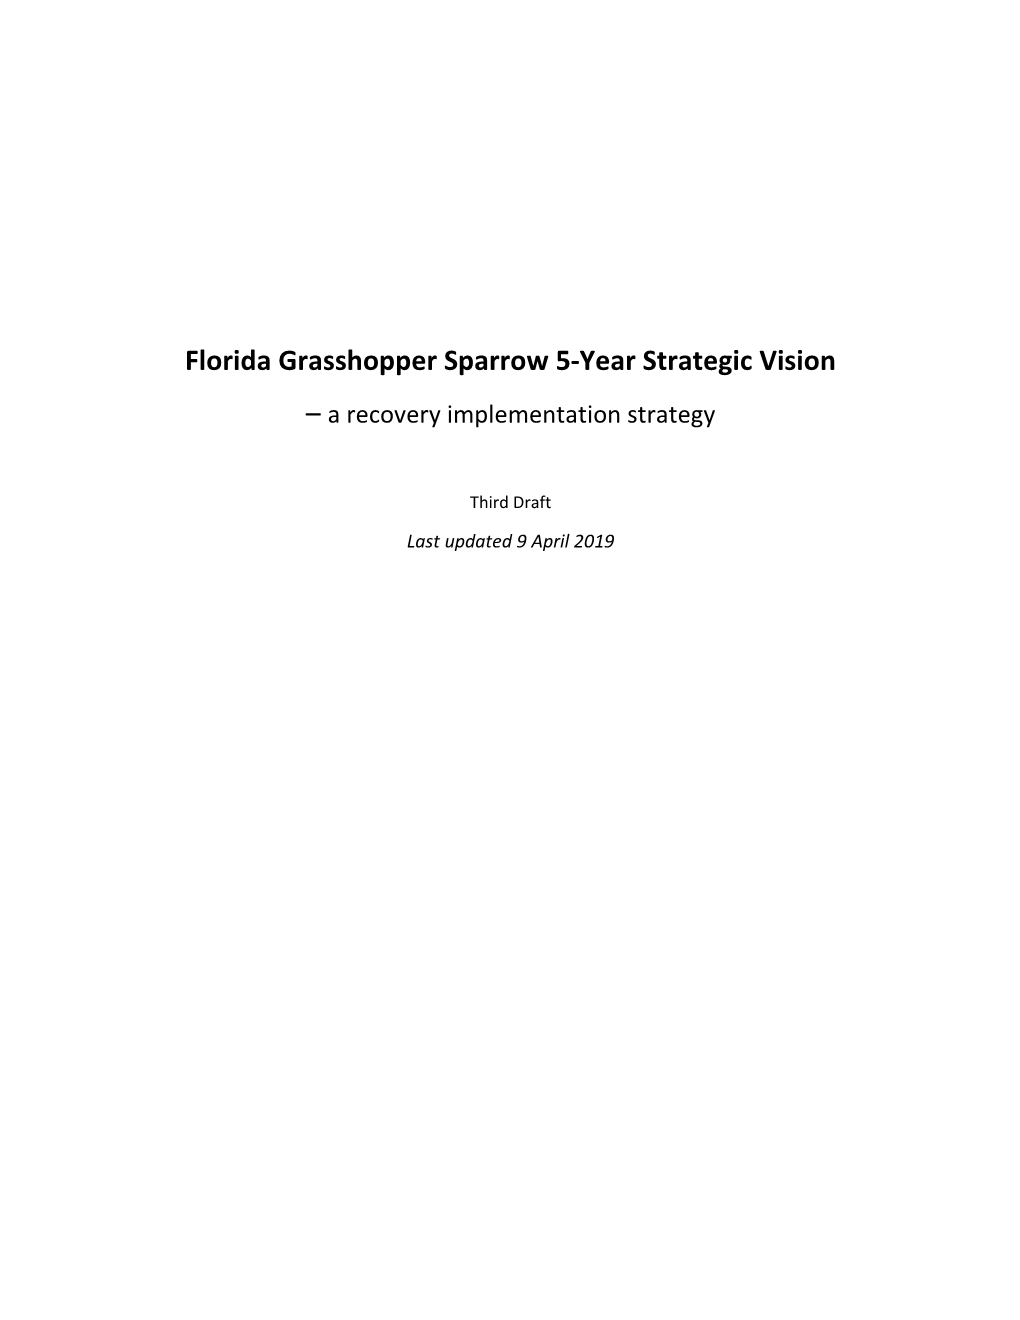 Florida Grasshopper Sparrow 5-Year Strategic Vision – a Recovery Implementation Strategy